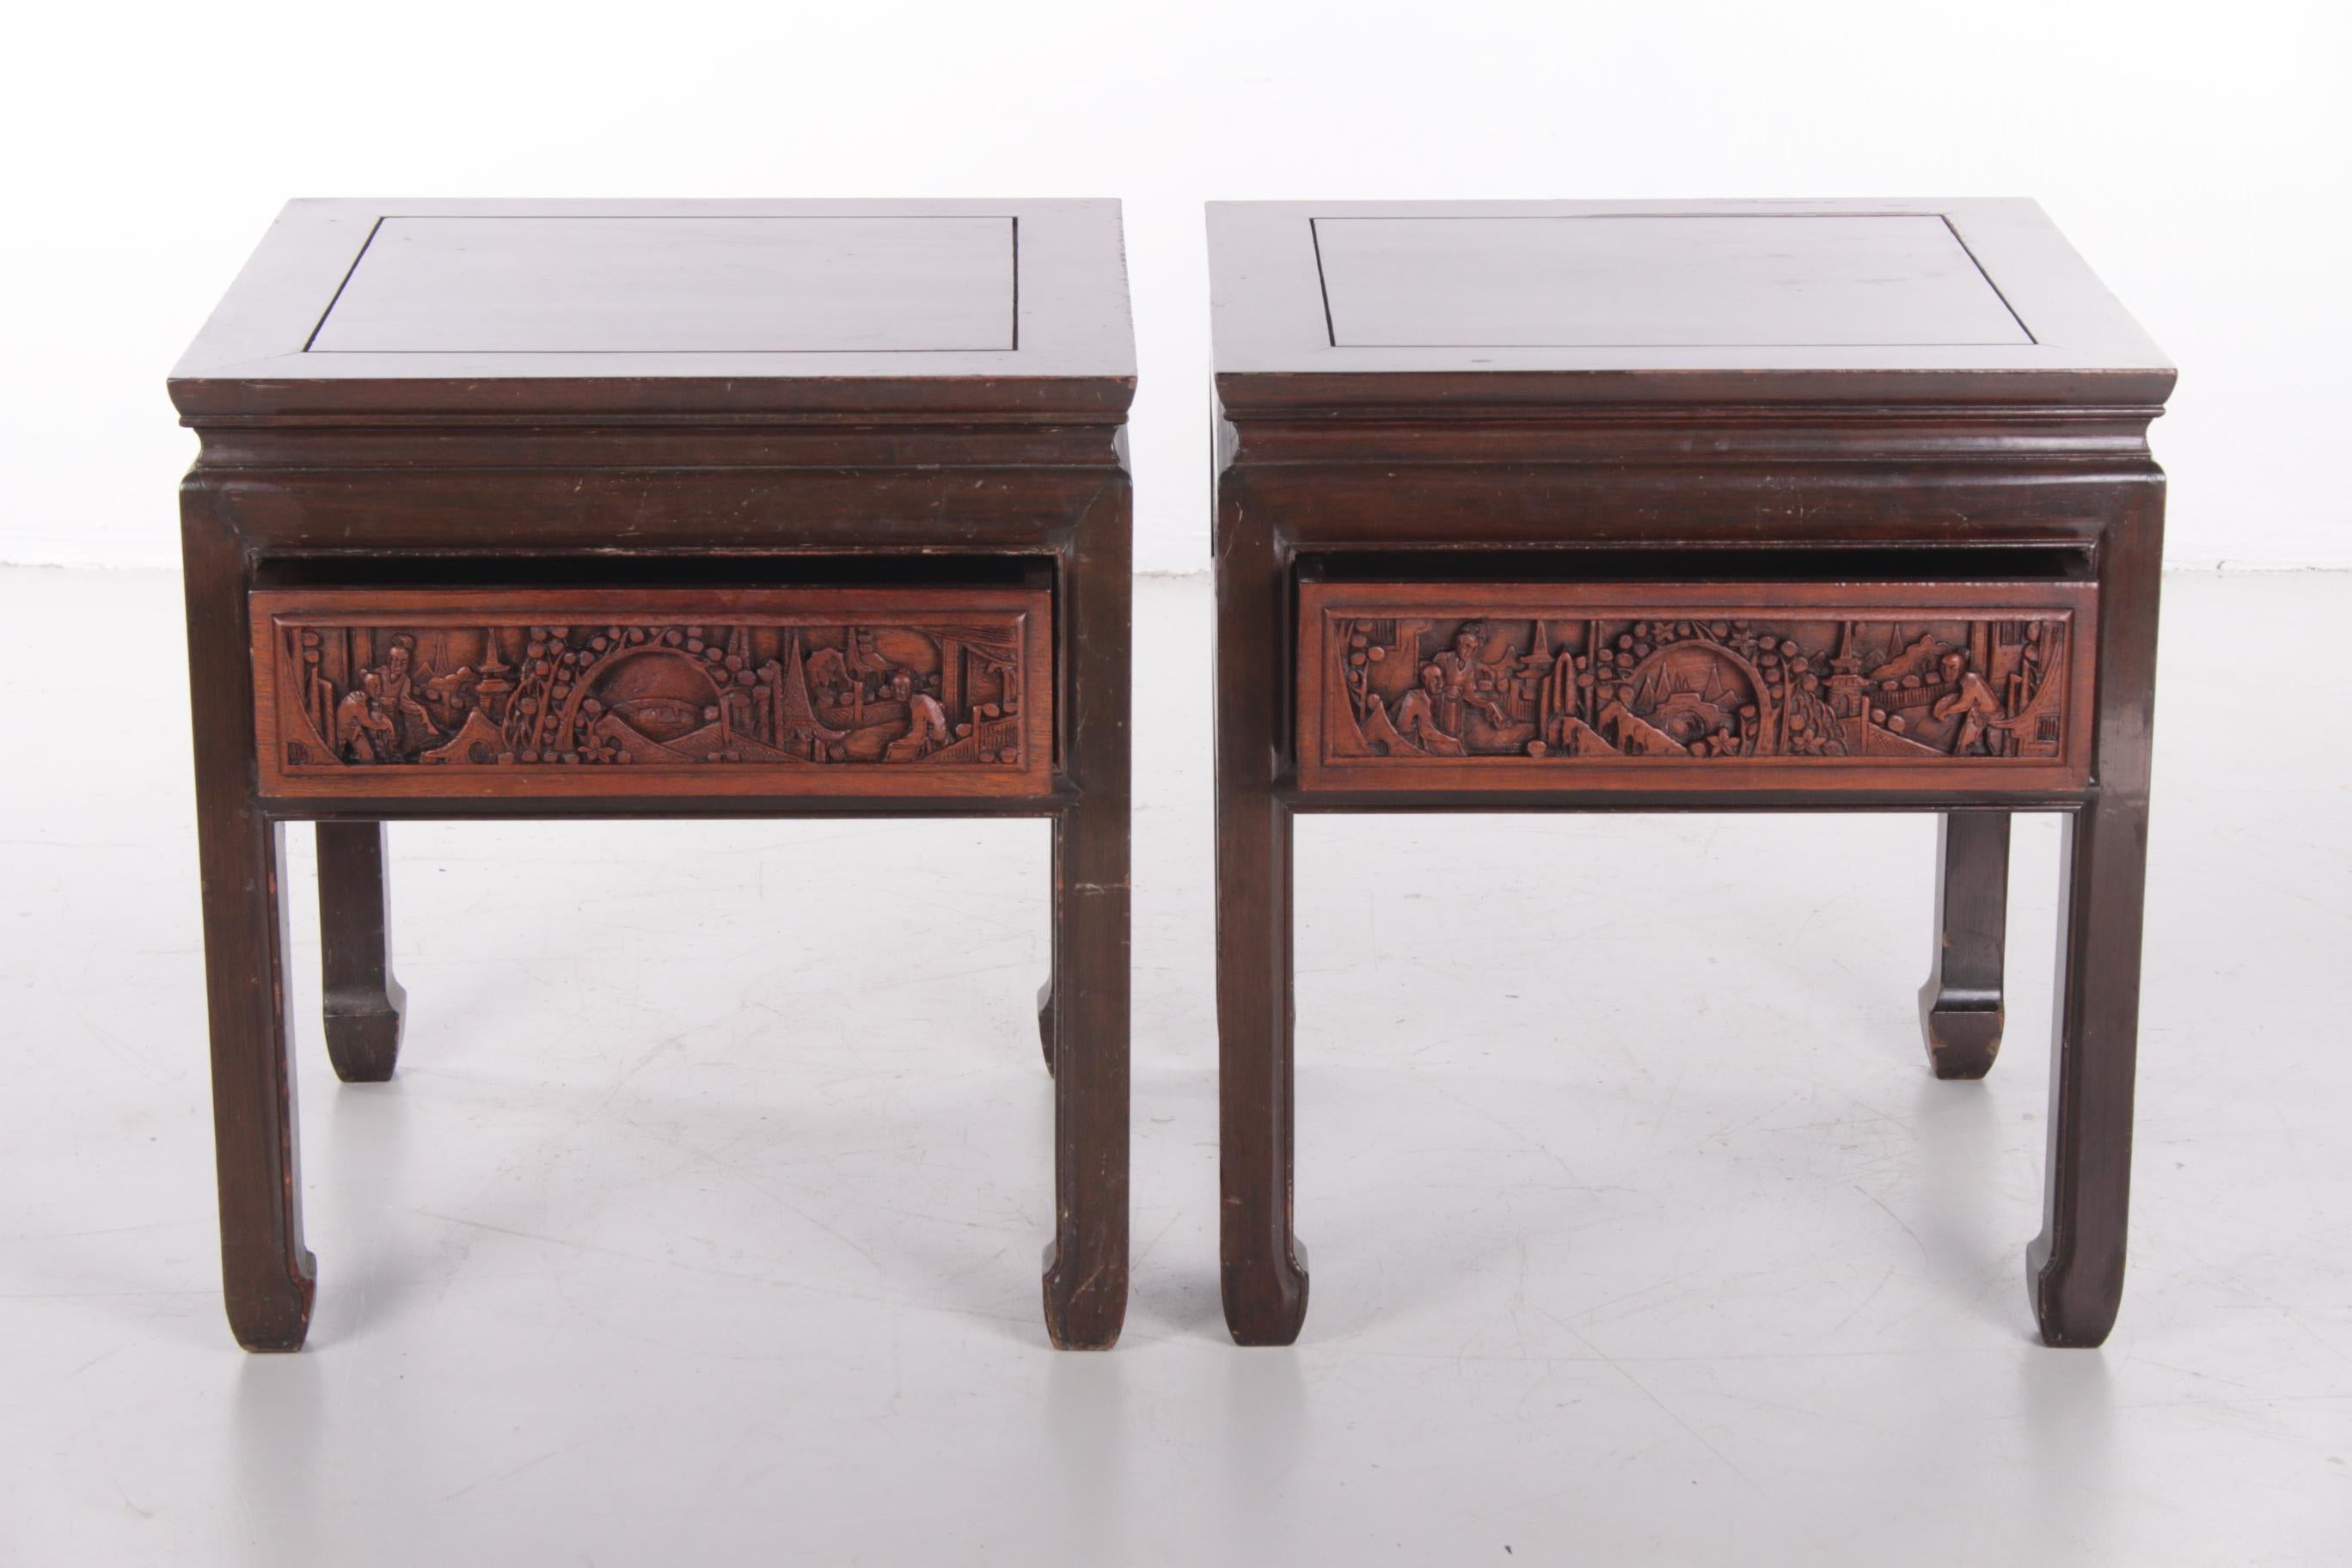 20th Century Chinese Wooden Bedside Tables with Beautiful Hand Carving 8